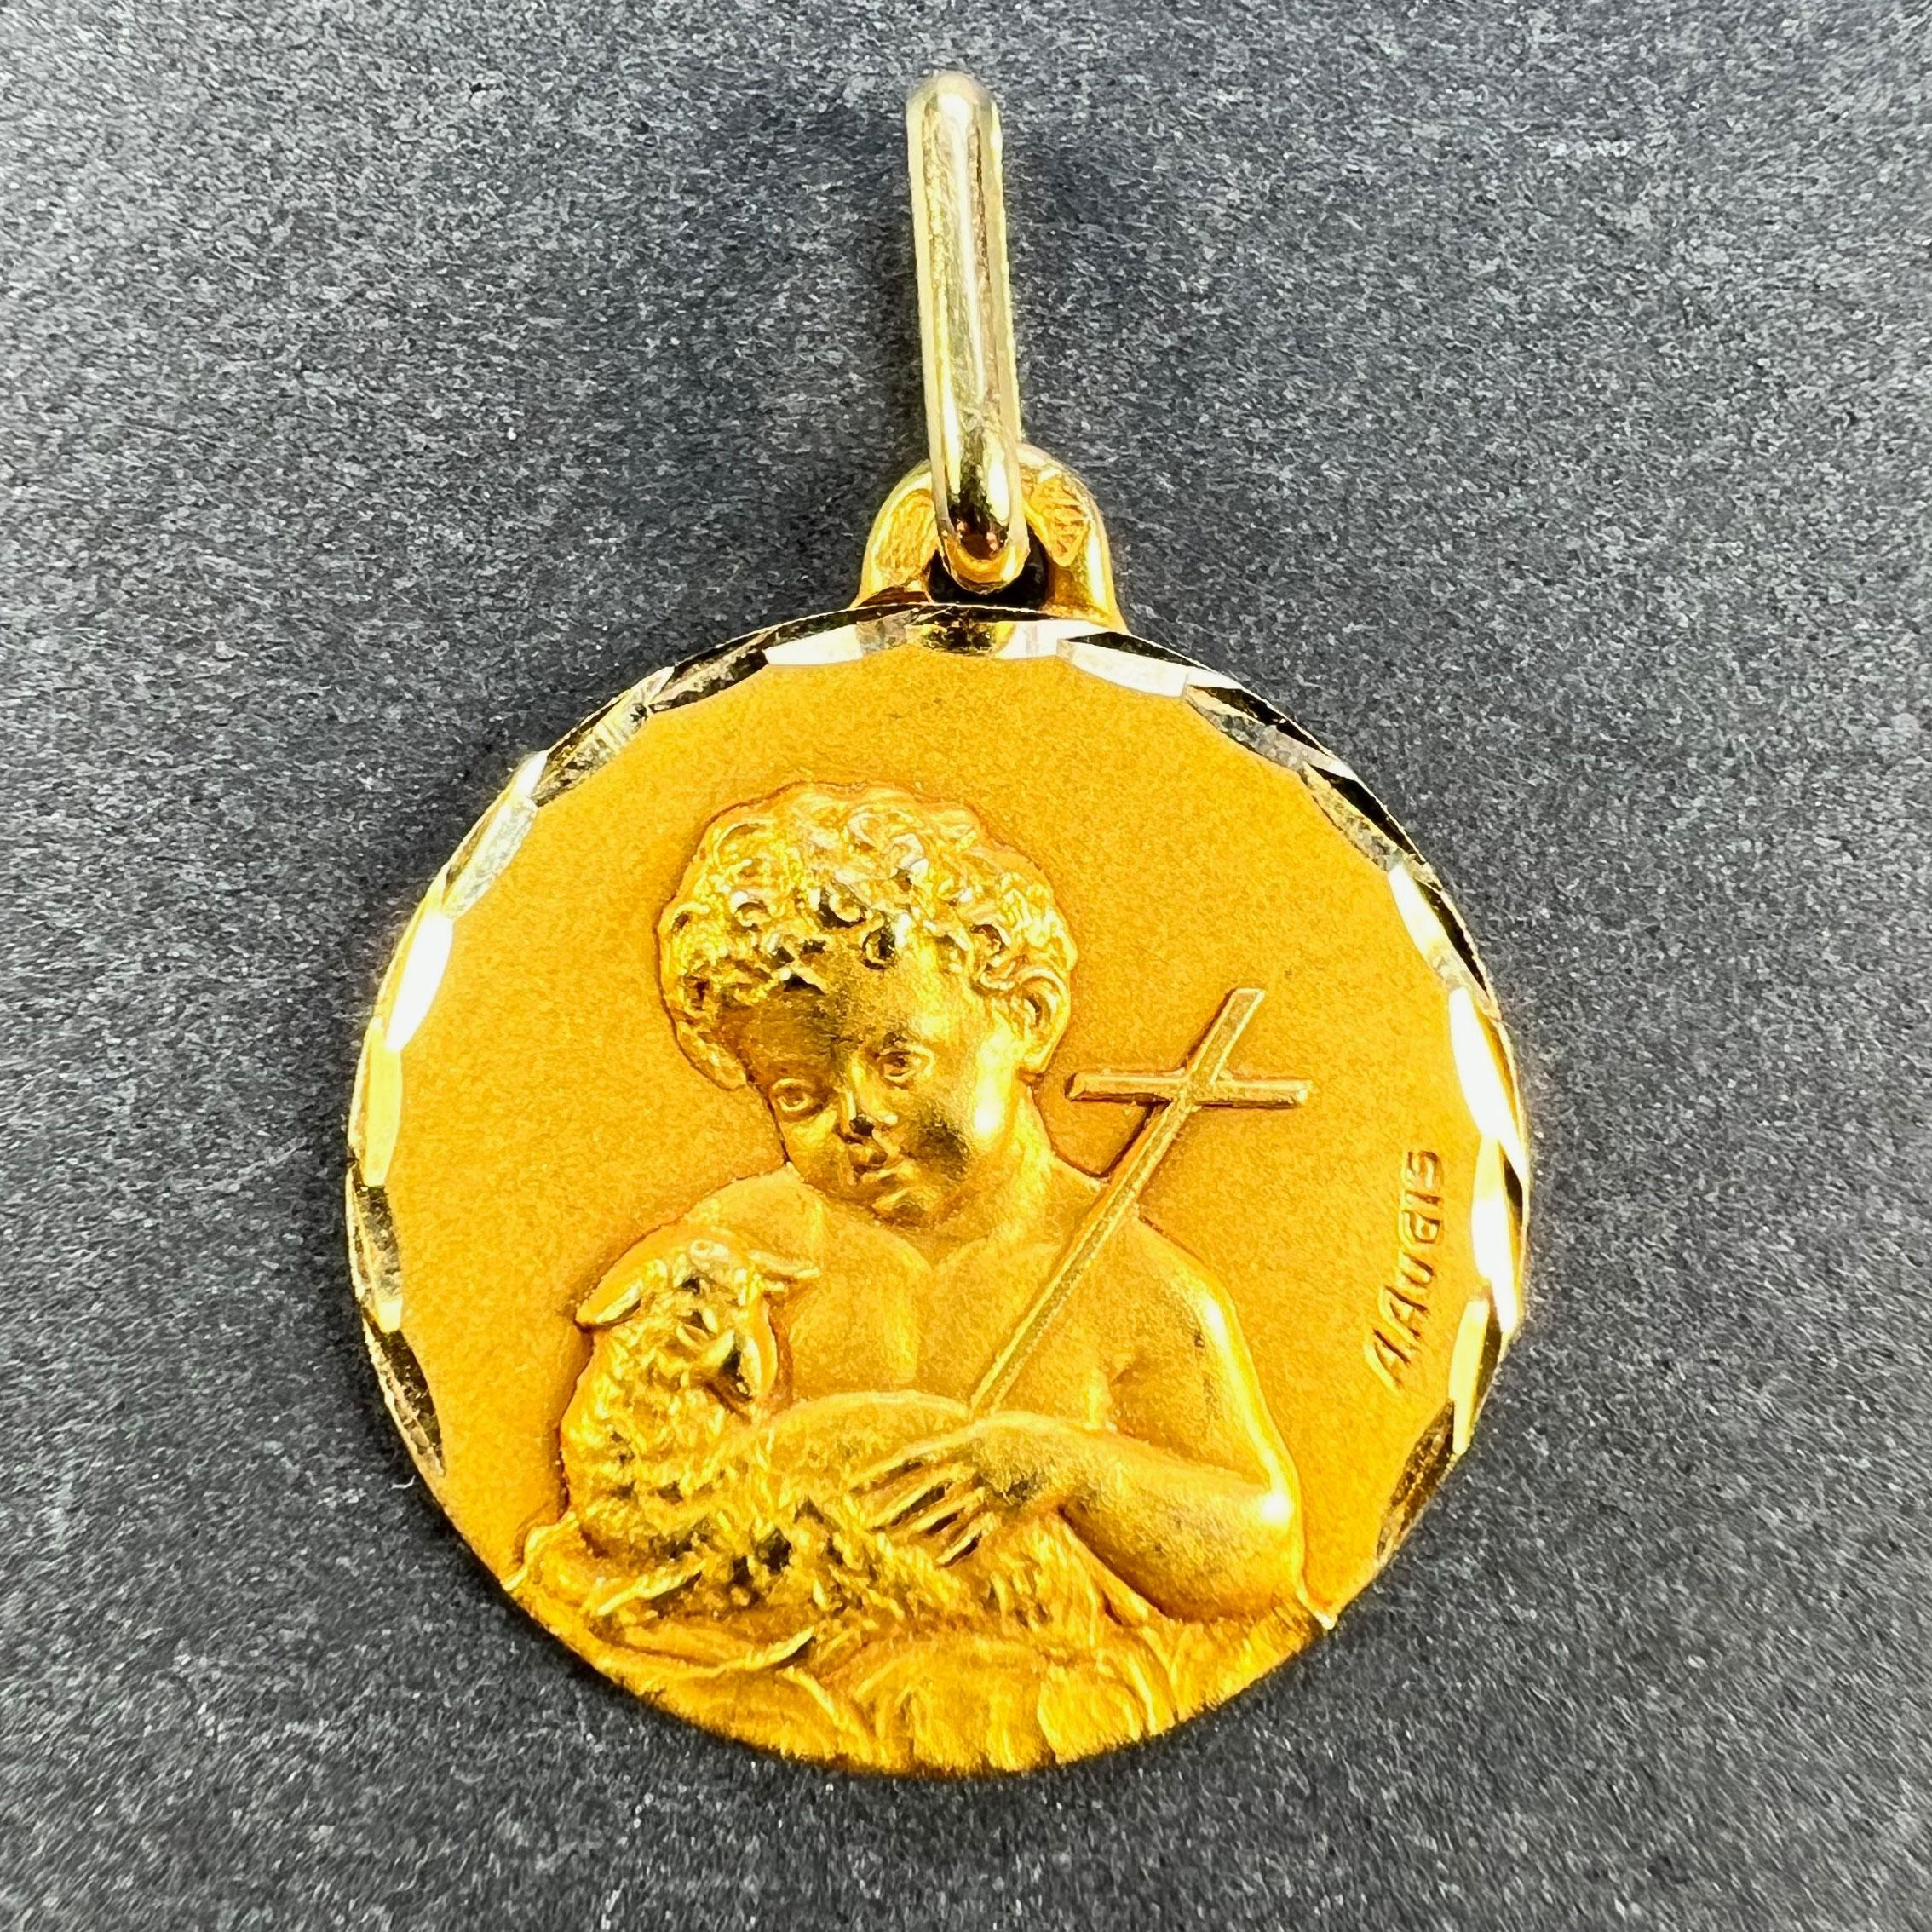 A French 18 karat (18K) yellow gold charm pendant designed as a medal representing Saint John the Baptist as a child with a cross and a sheep. Signed A. Augis, stamped with the eagle's head for French manufacture and 18 karat gold with Augis's